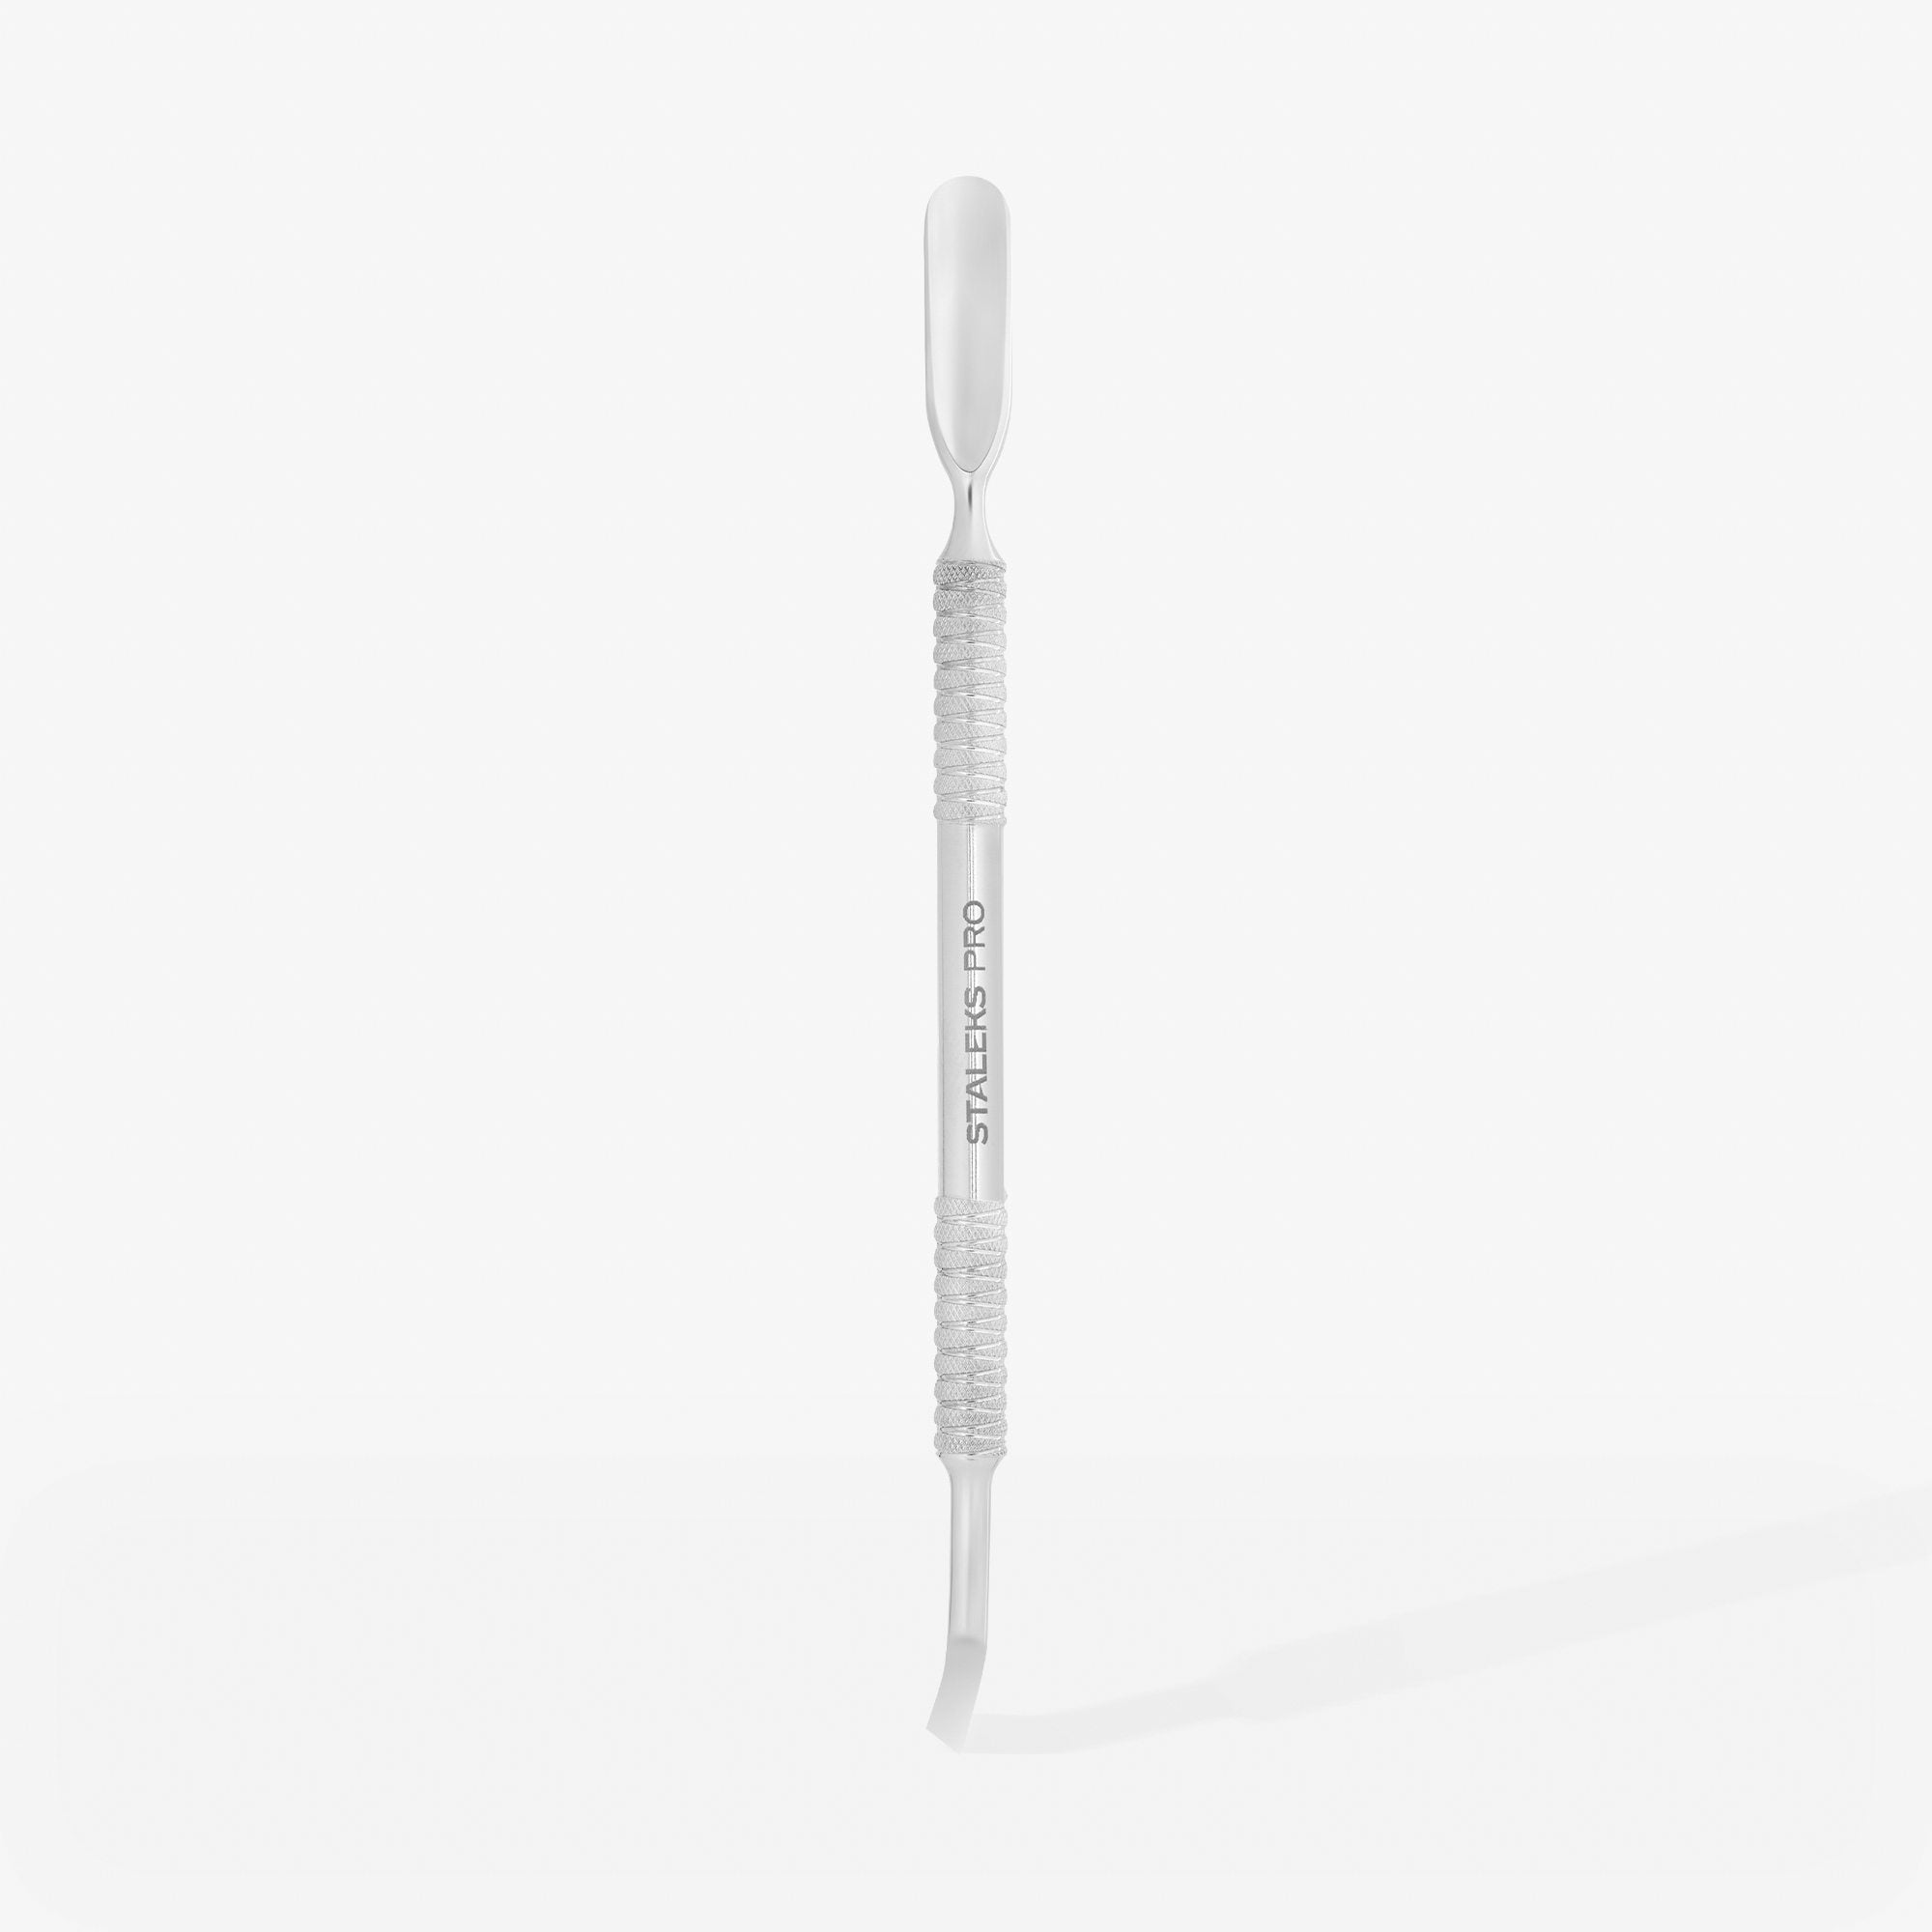 Staleks Pro Cuticle Pusher - Rounded For Left Handed Users